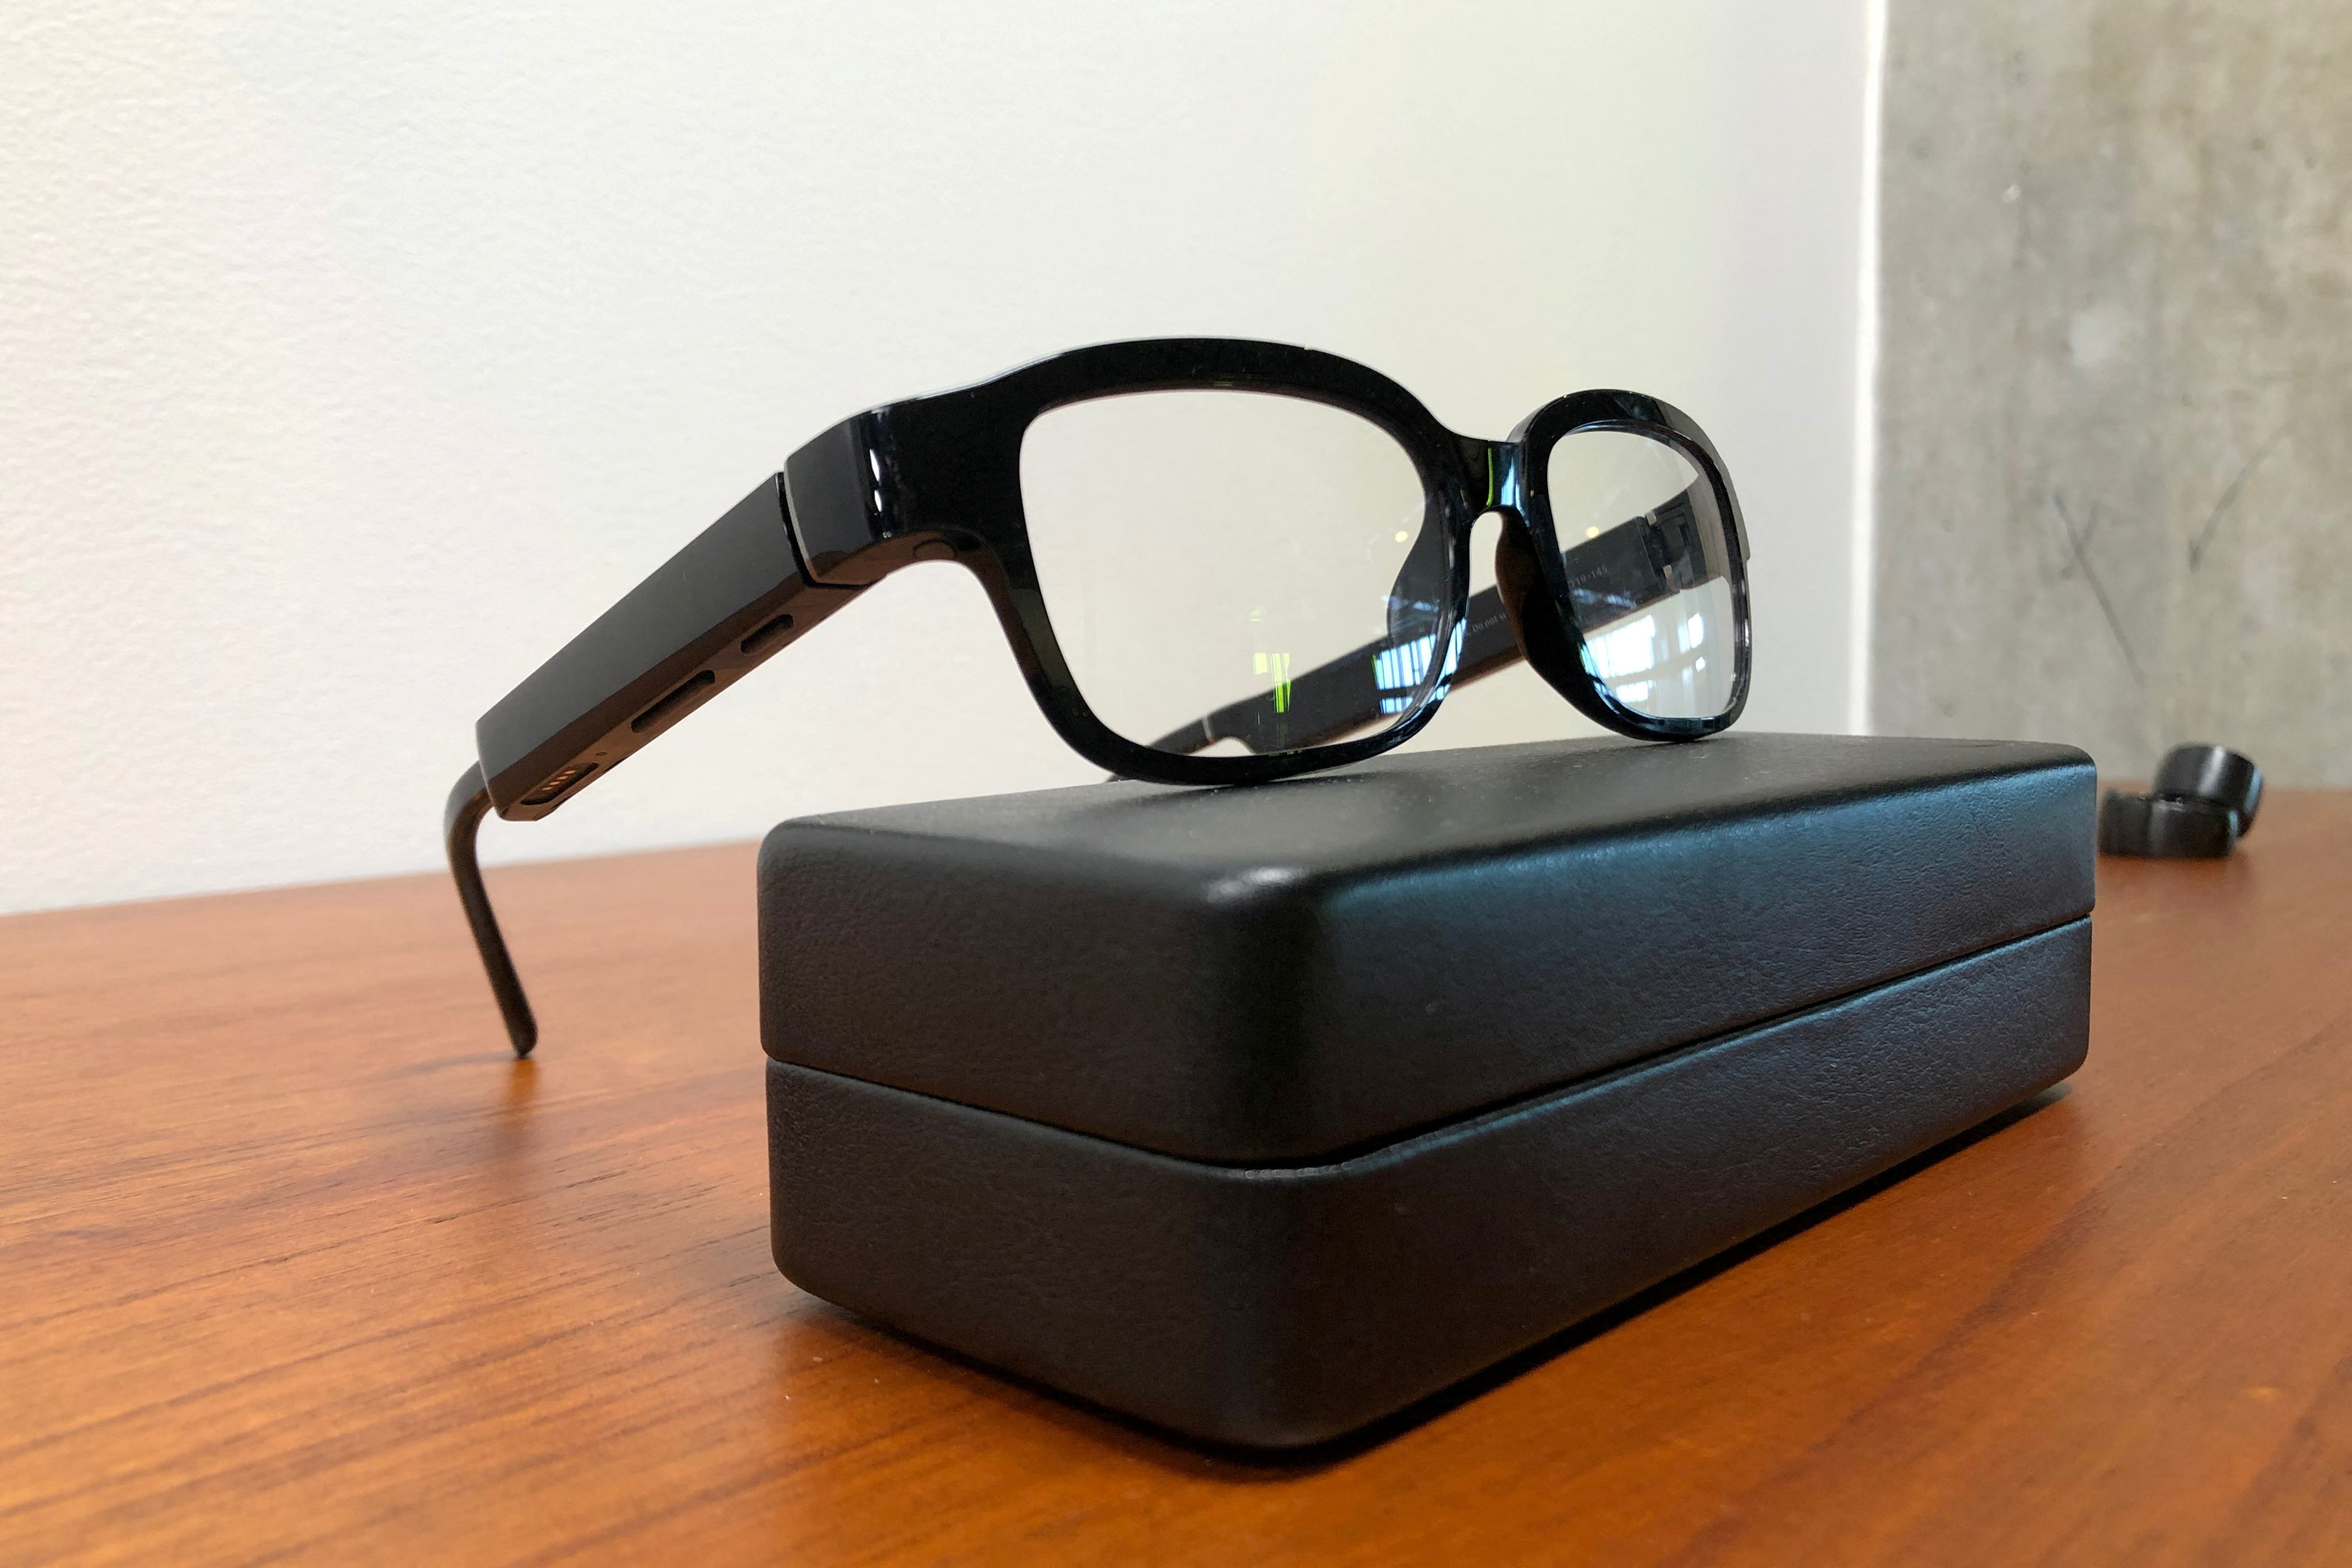 Amazon’s new eyeglasses that come with its virtual assistant Alexa, the Echo Frames, rest on a display in Seattle